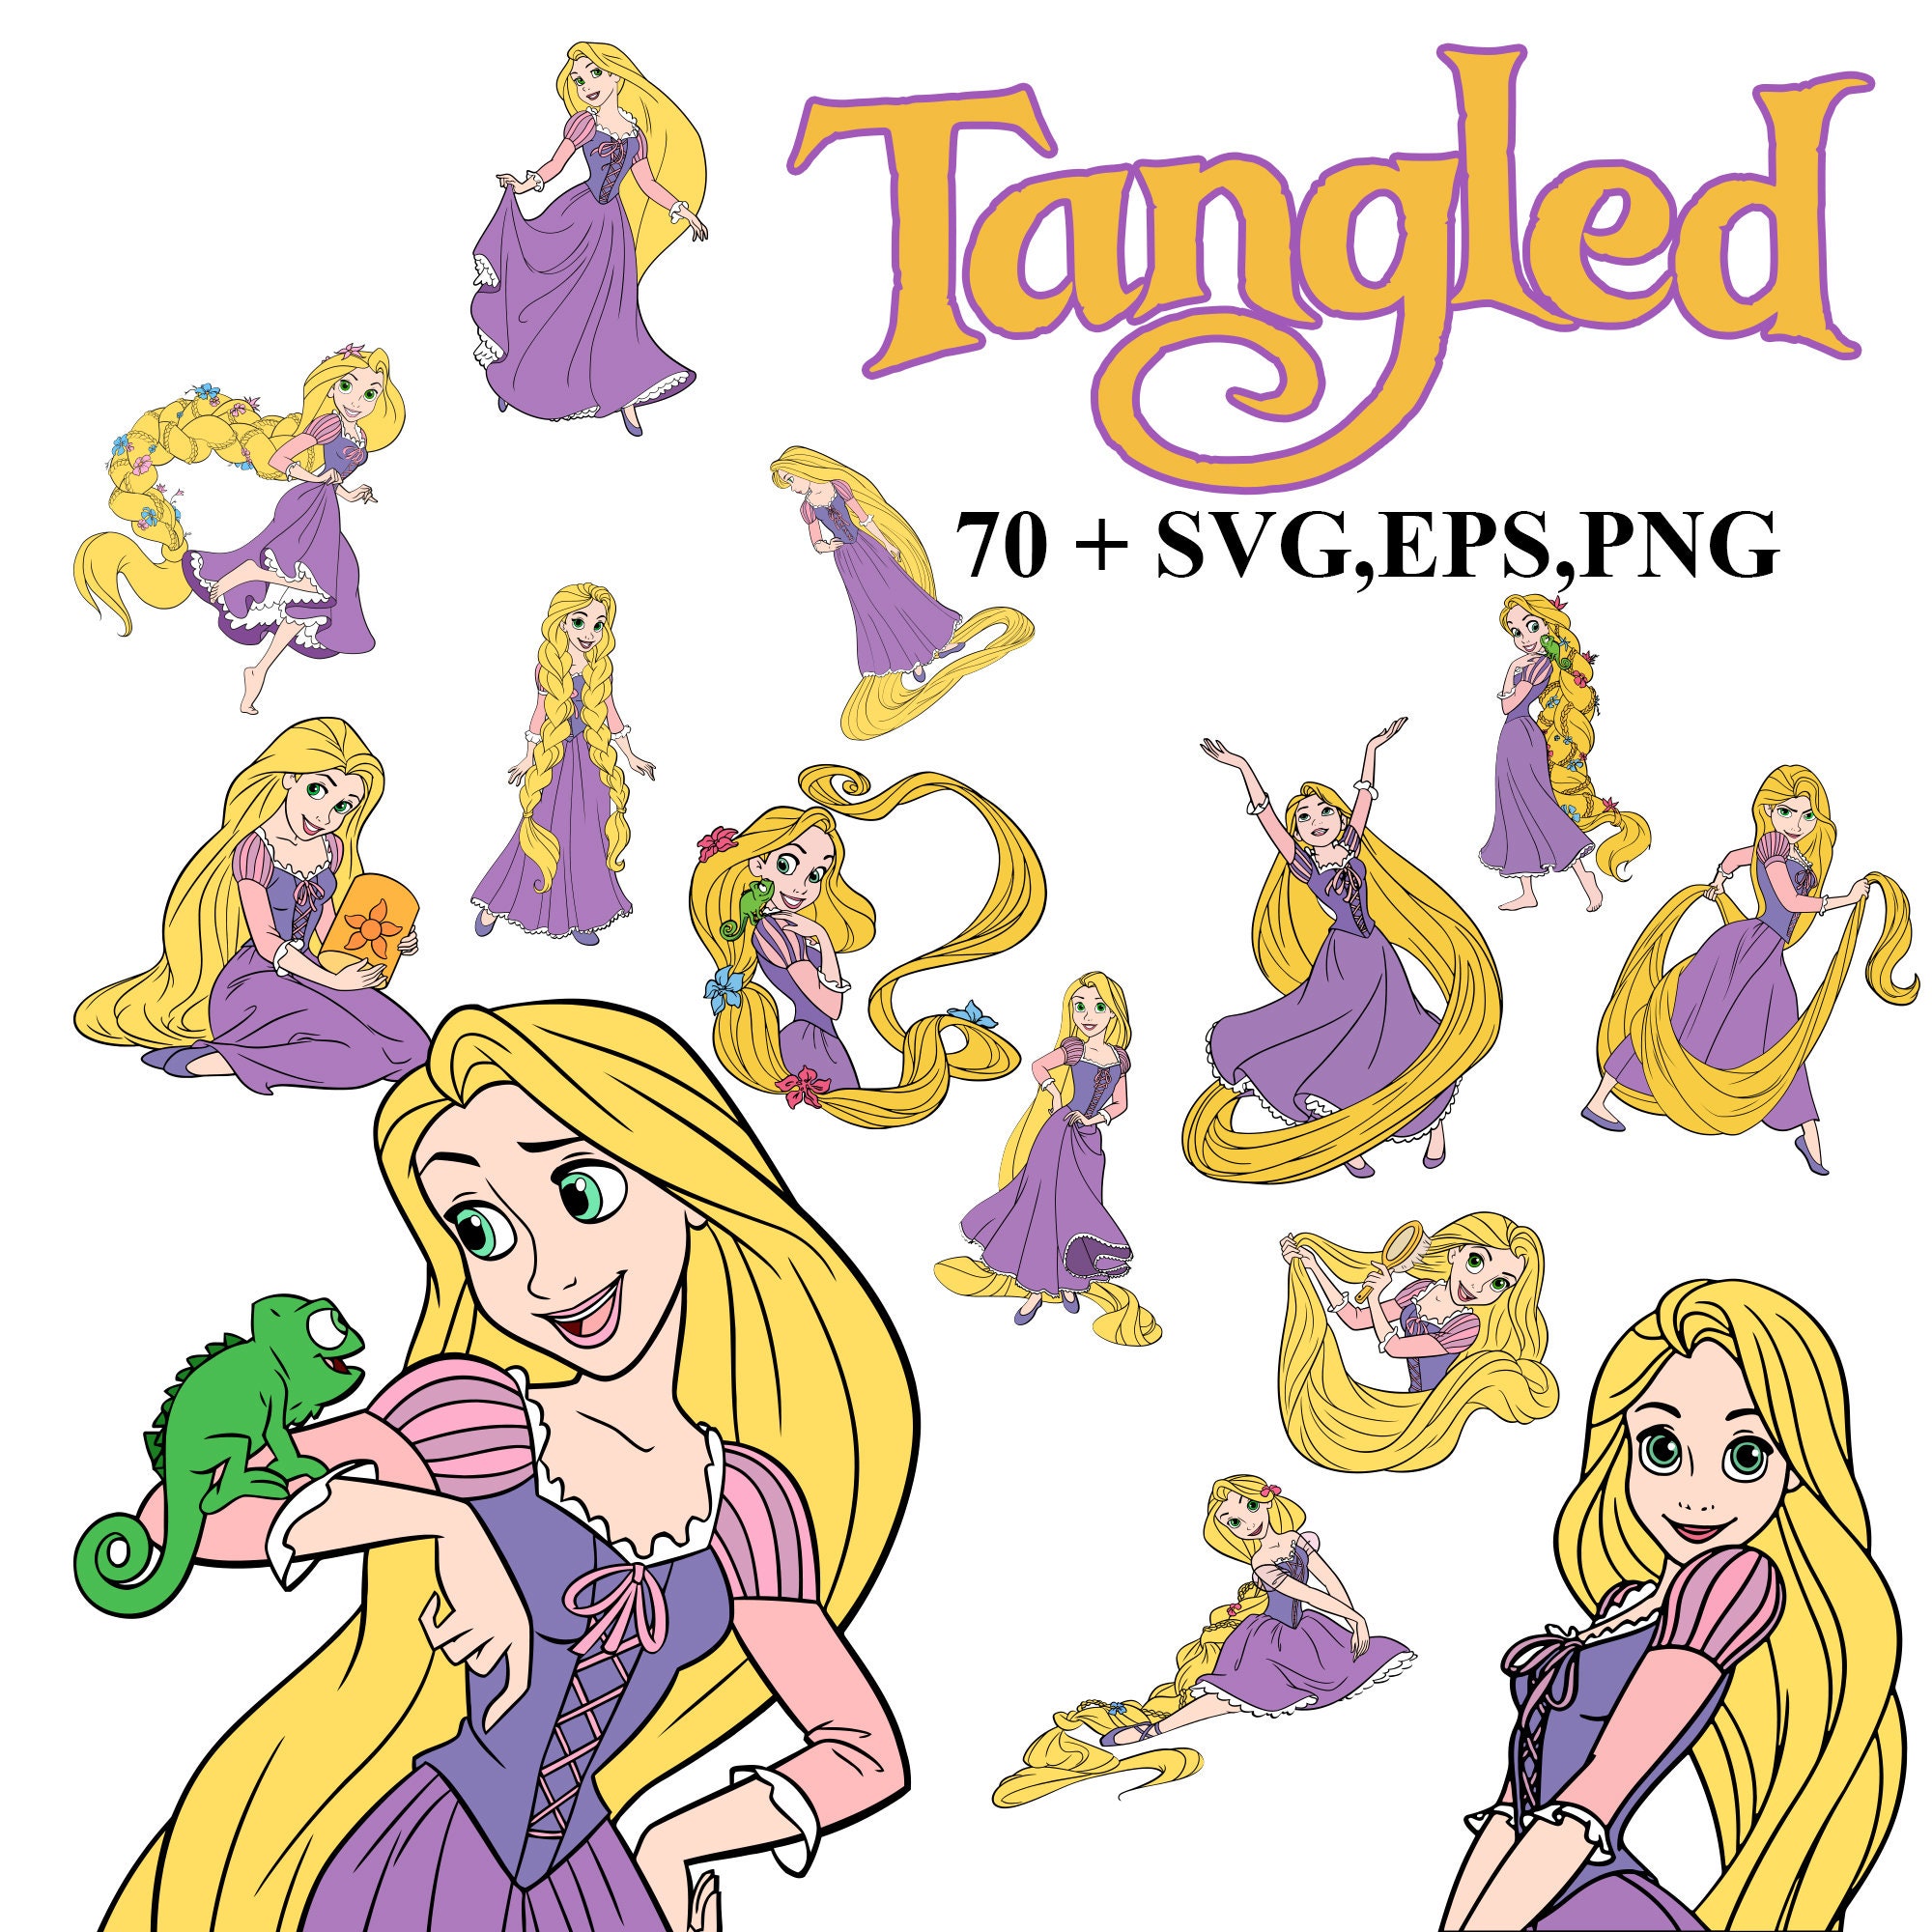 Tangled Cupcake Toppers, Gold Glittered Star Cupcake Toppers, Rapunzel  Theme Cupcake Topper, Tangled Party Decor Set of 6ct. 